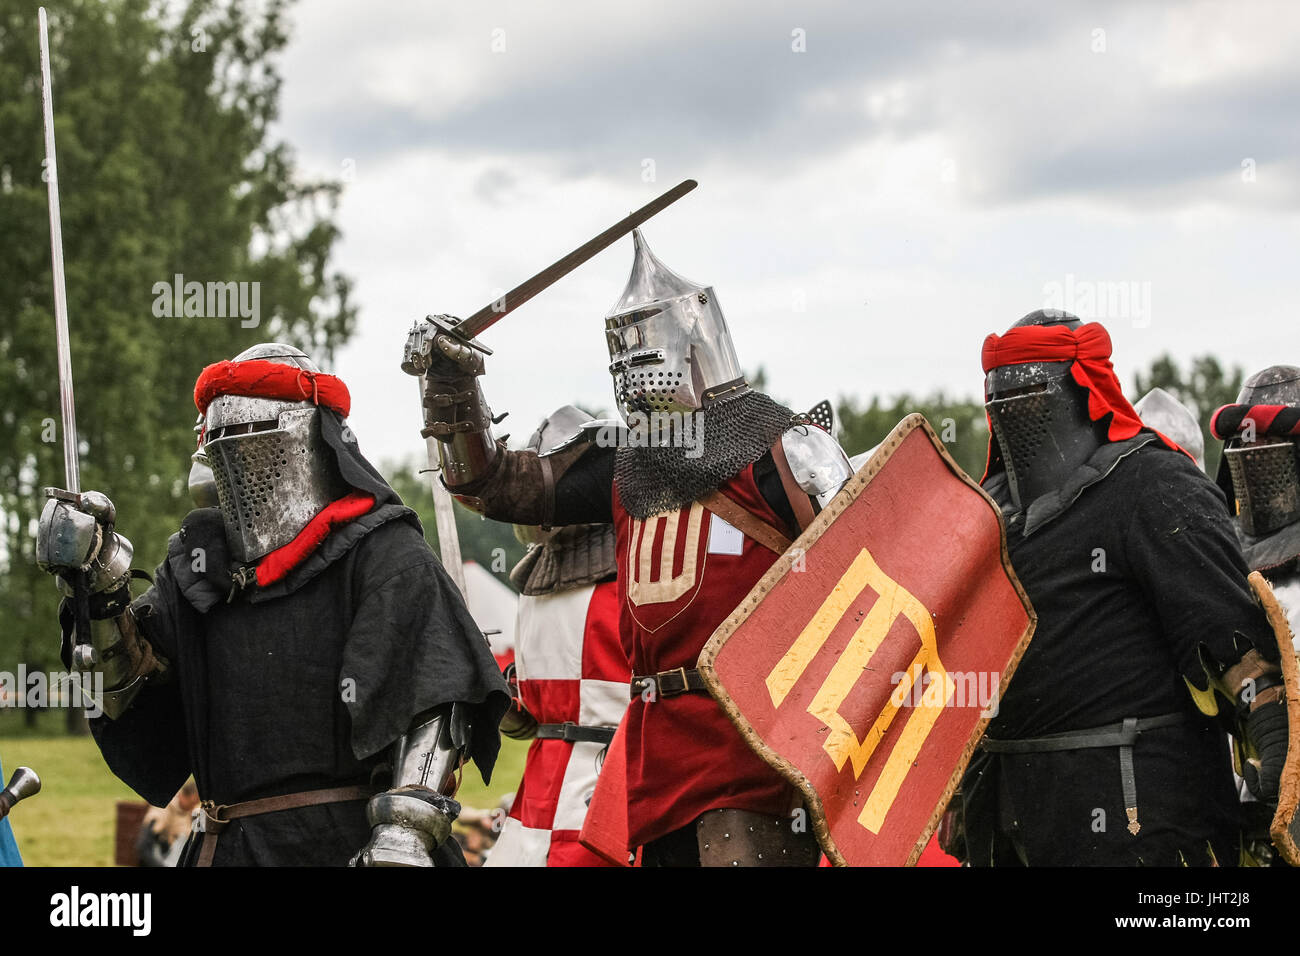 Grunwald, Poland. 15th July, 2017. Battle of Grunwald reenactment is seen on 15 July 2017 in Grunwald, Poland. The Battle of Grunwald, was fought on 15 July 1410 during the Polish–Lithuanian–Teutonic War. The alliance of the Kingdom of Poland and the Grand Duchy of Lithuania, led respectively by King Wladyslaw II Jagiello and Grand Duke Vytautas decisively defeated the German–Prussian Teutonic Knights, led by Grand Master Ulrich von Jungingen. Most of the Teutonic Knights' leadership were killed or taken prisoner. Credit: Michal Fludra/Alamy Live News Stock Photo